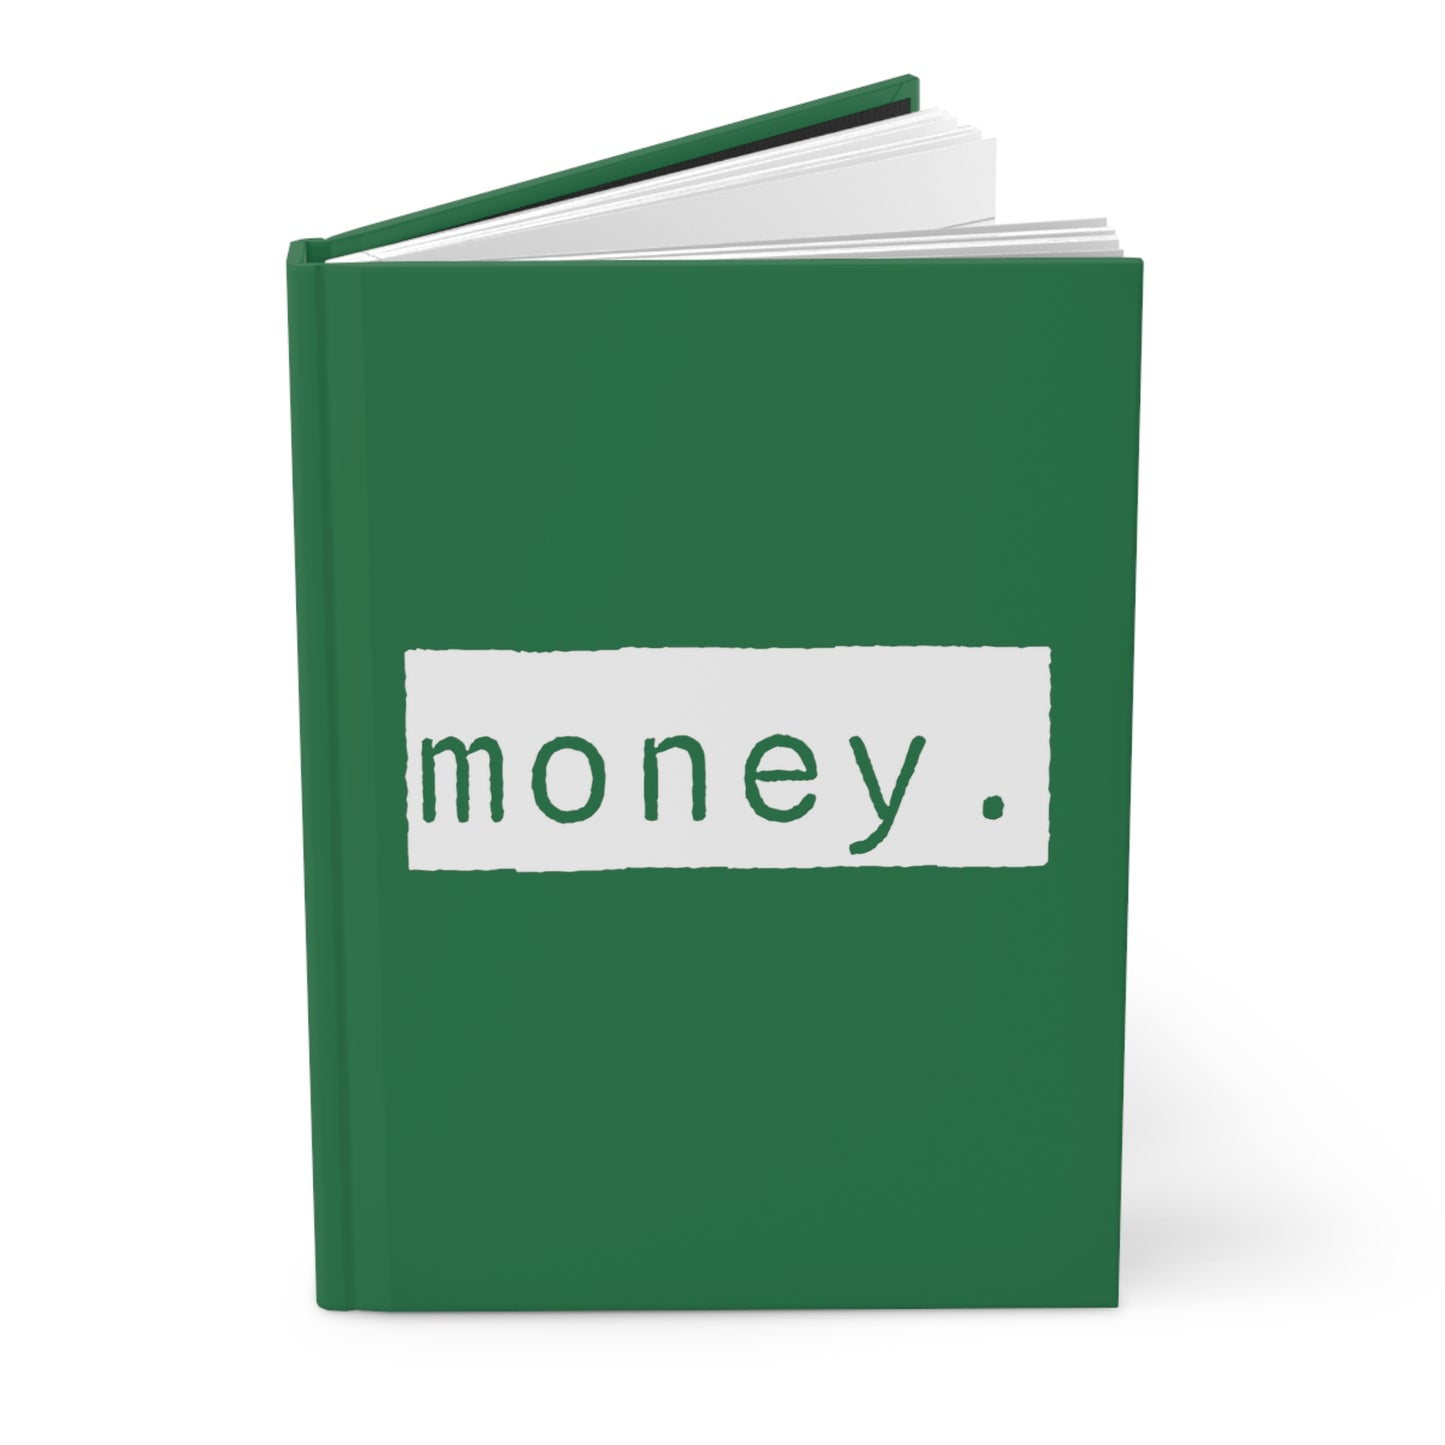 Money Green Matte Hardcover Journal | Blank Book for Tracking Finances and Spending | Lined Notebook Diary Financial Planning Log